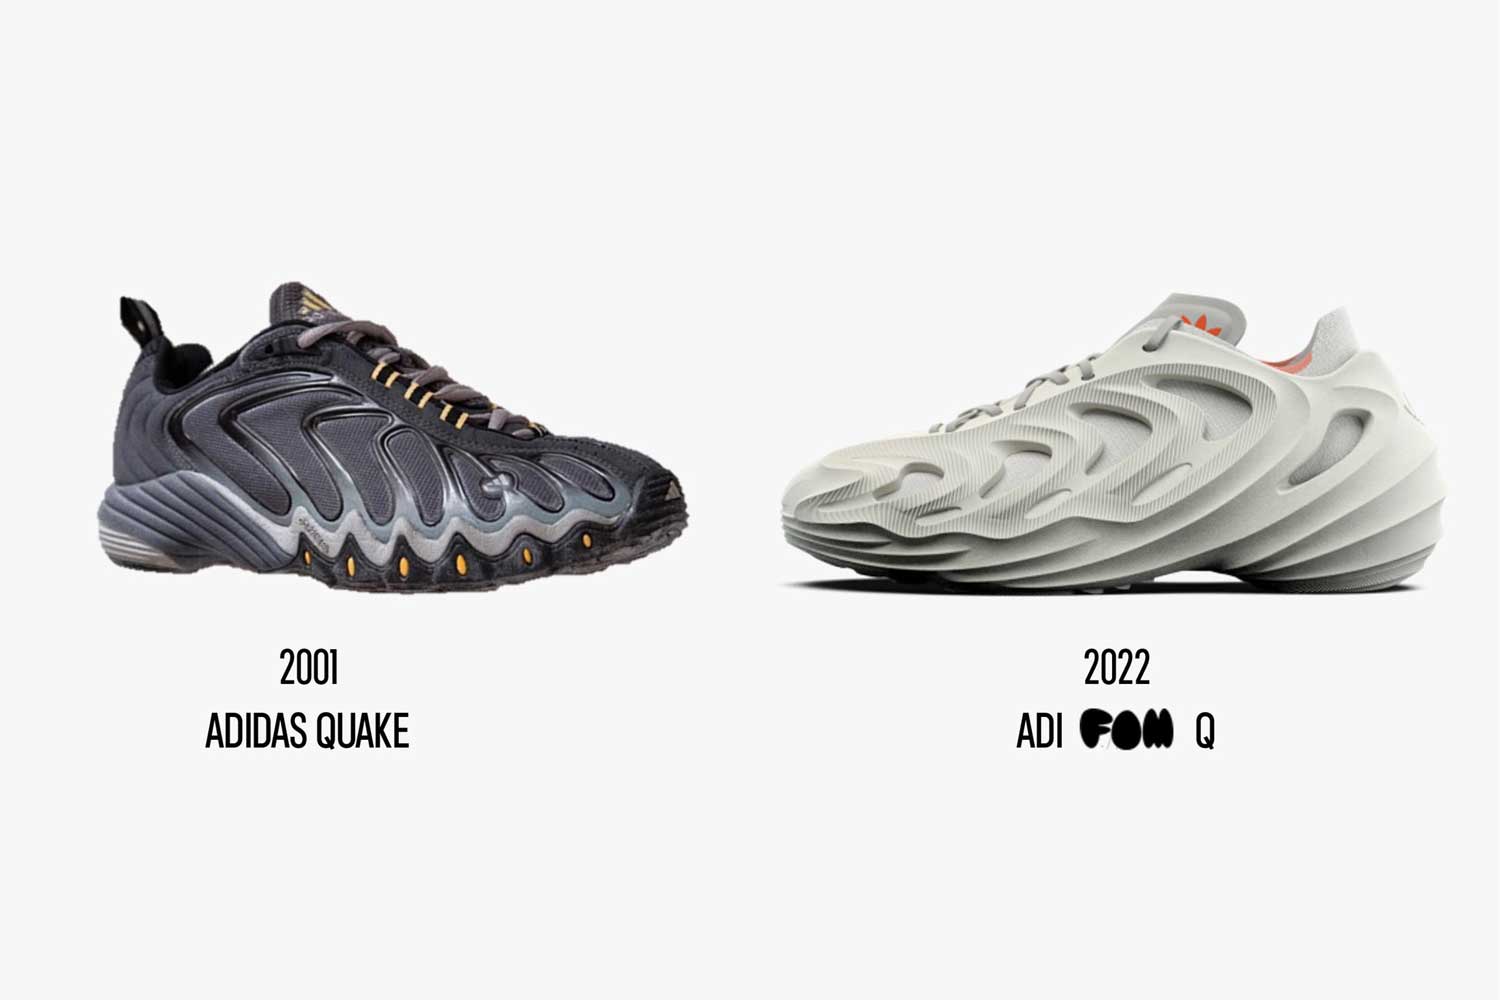 Every Kanye sneaker that came before the adidas Yeezy's